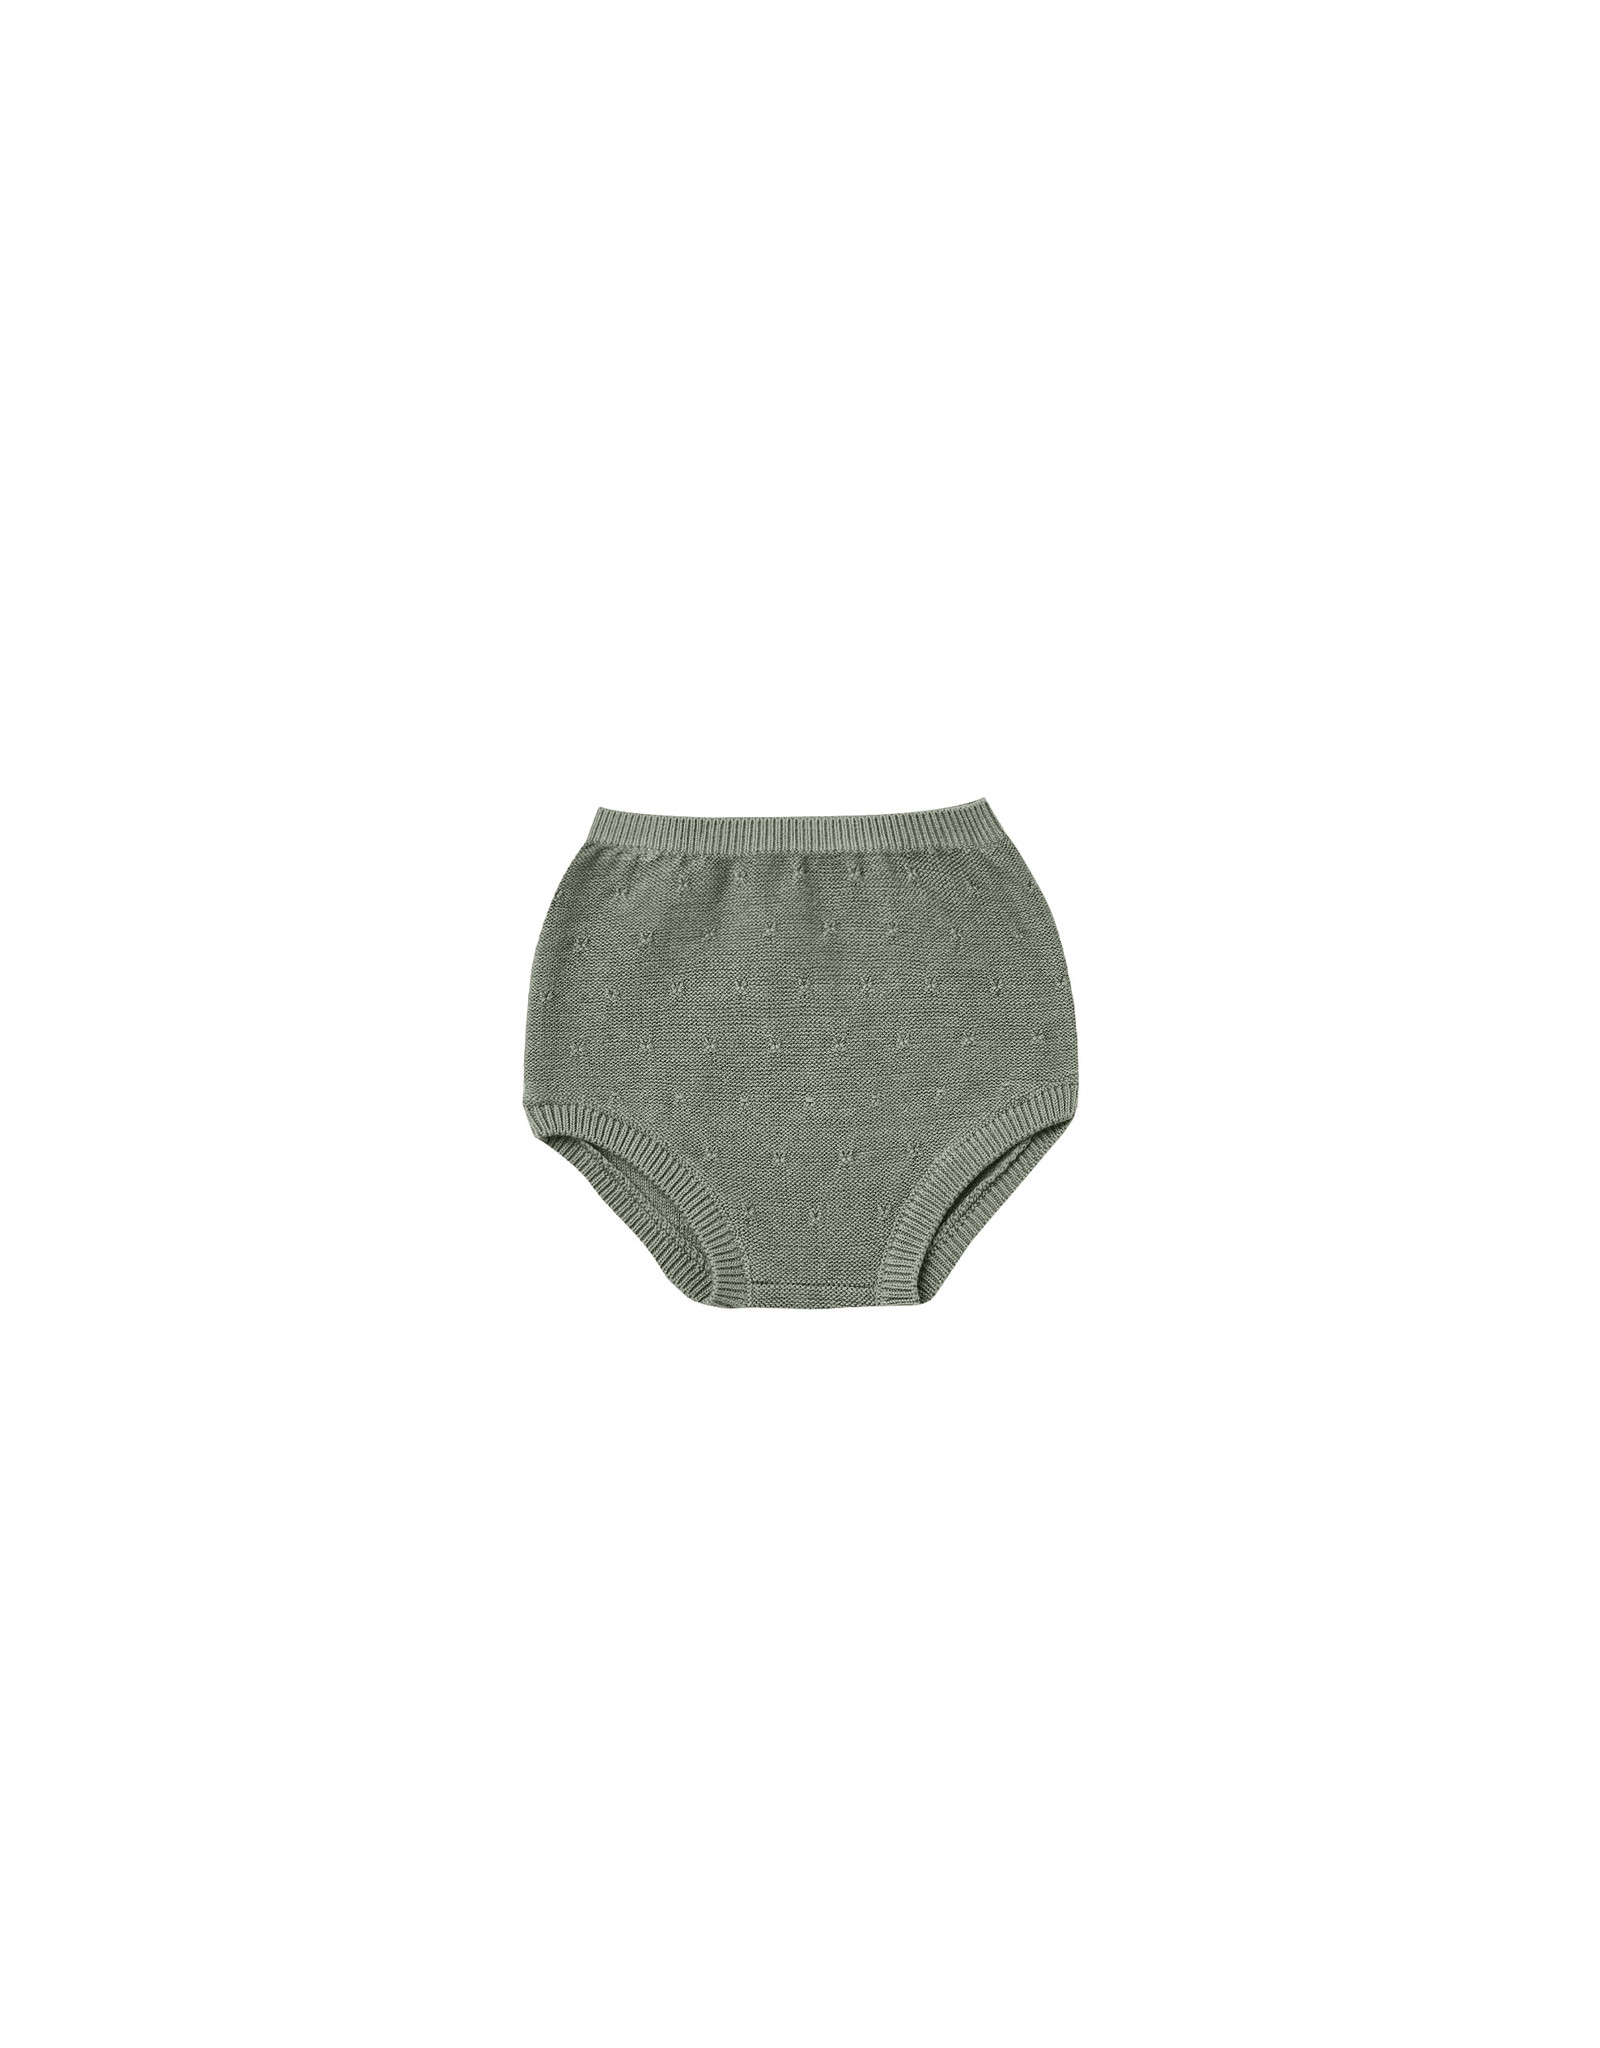 Quincy Mae Knit Bloomers